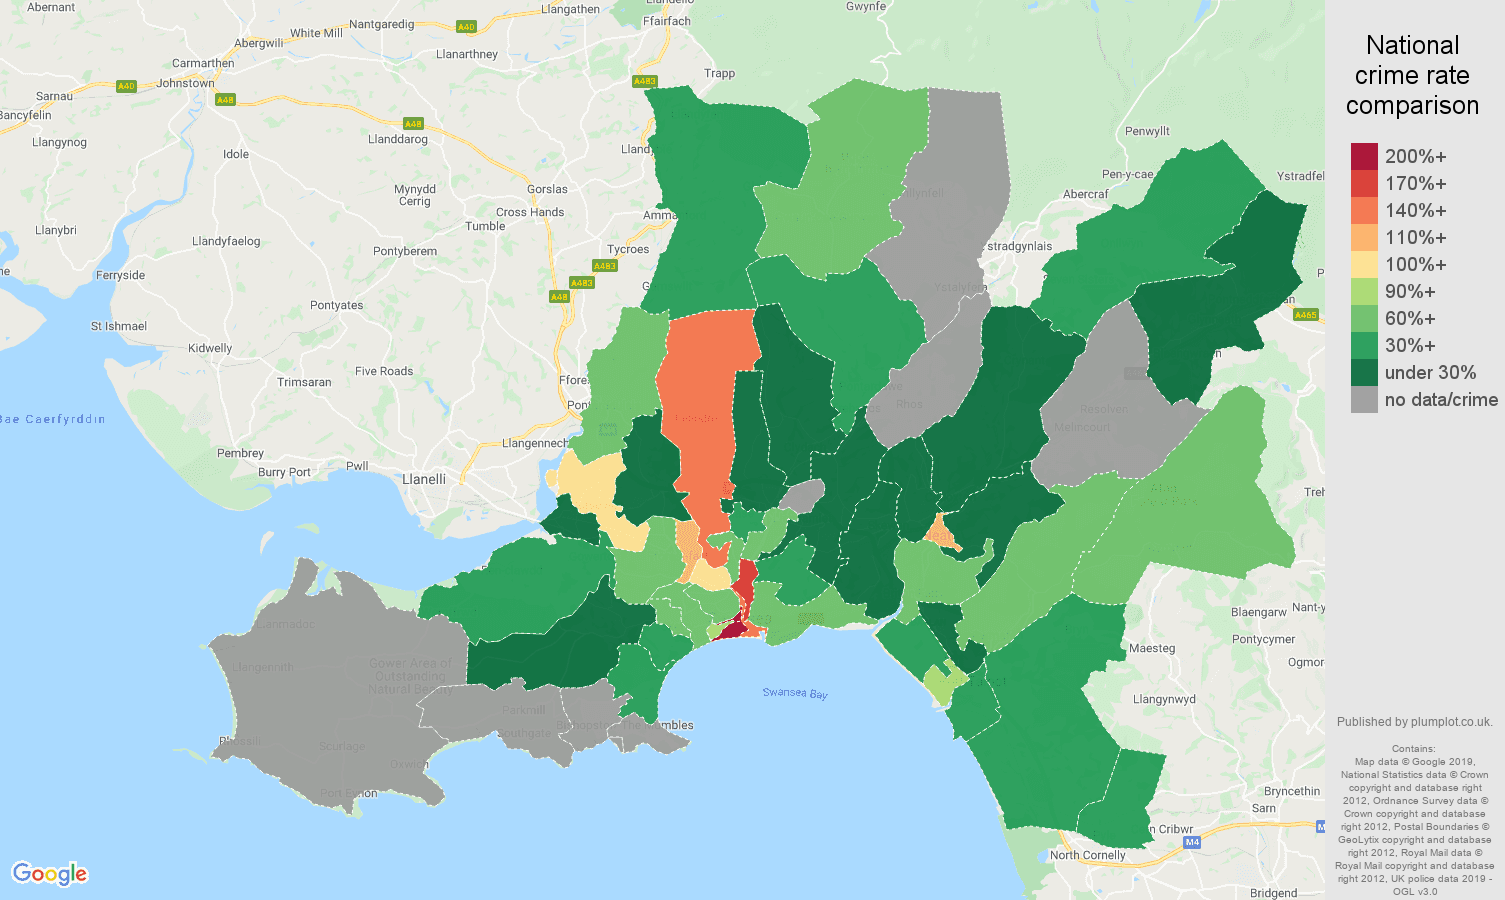 West Glamorgan possession of weapons crime rate comparison map